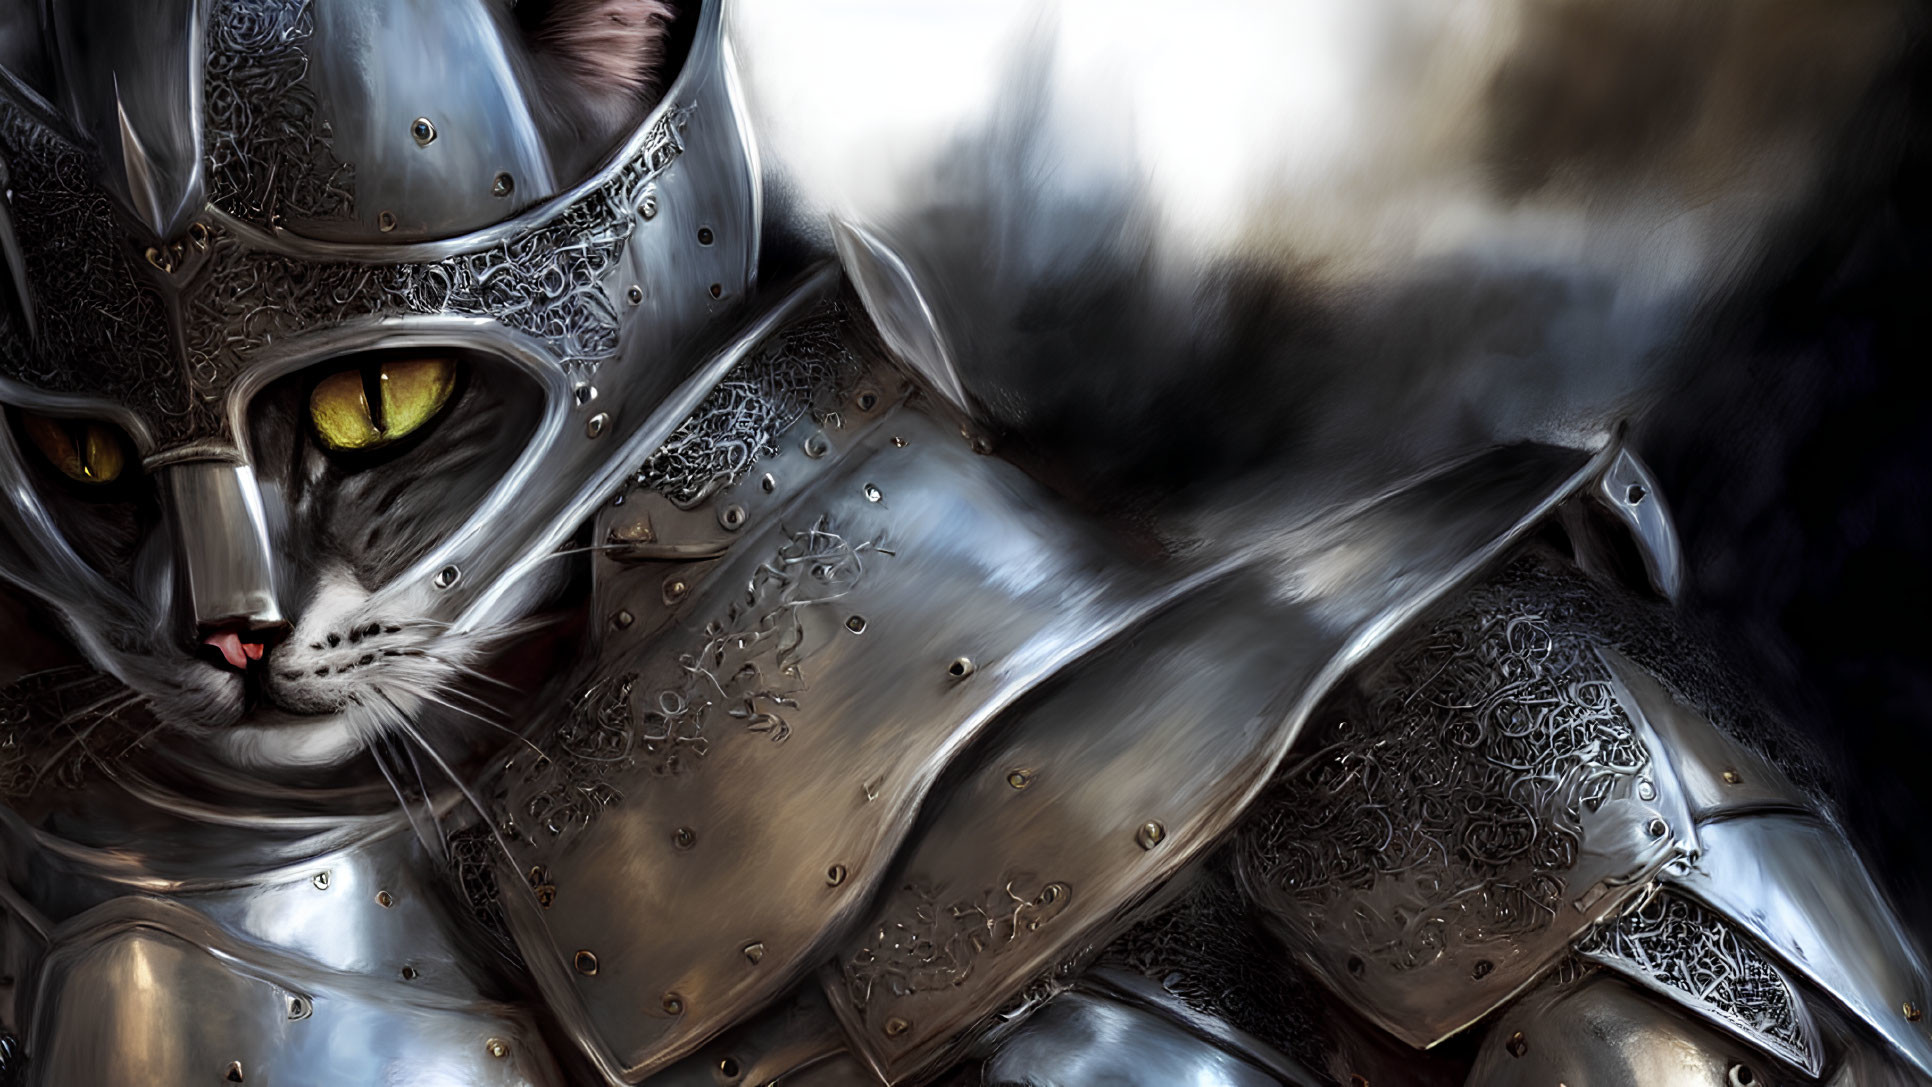 Medieval armor-clad cat with intricate patterns and yellow eyes